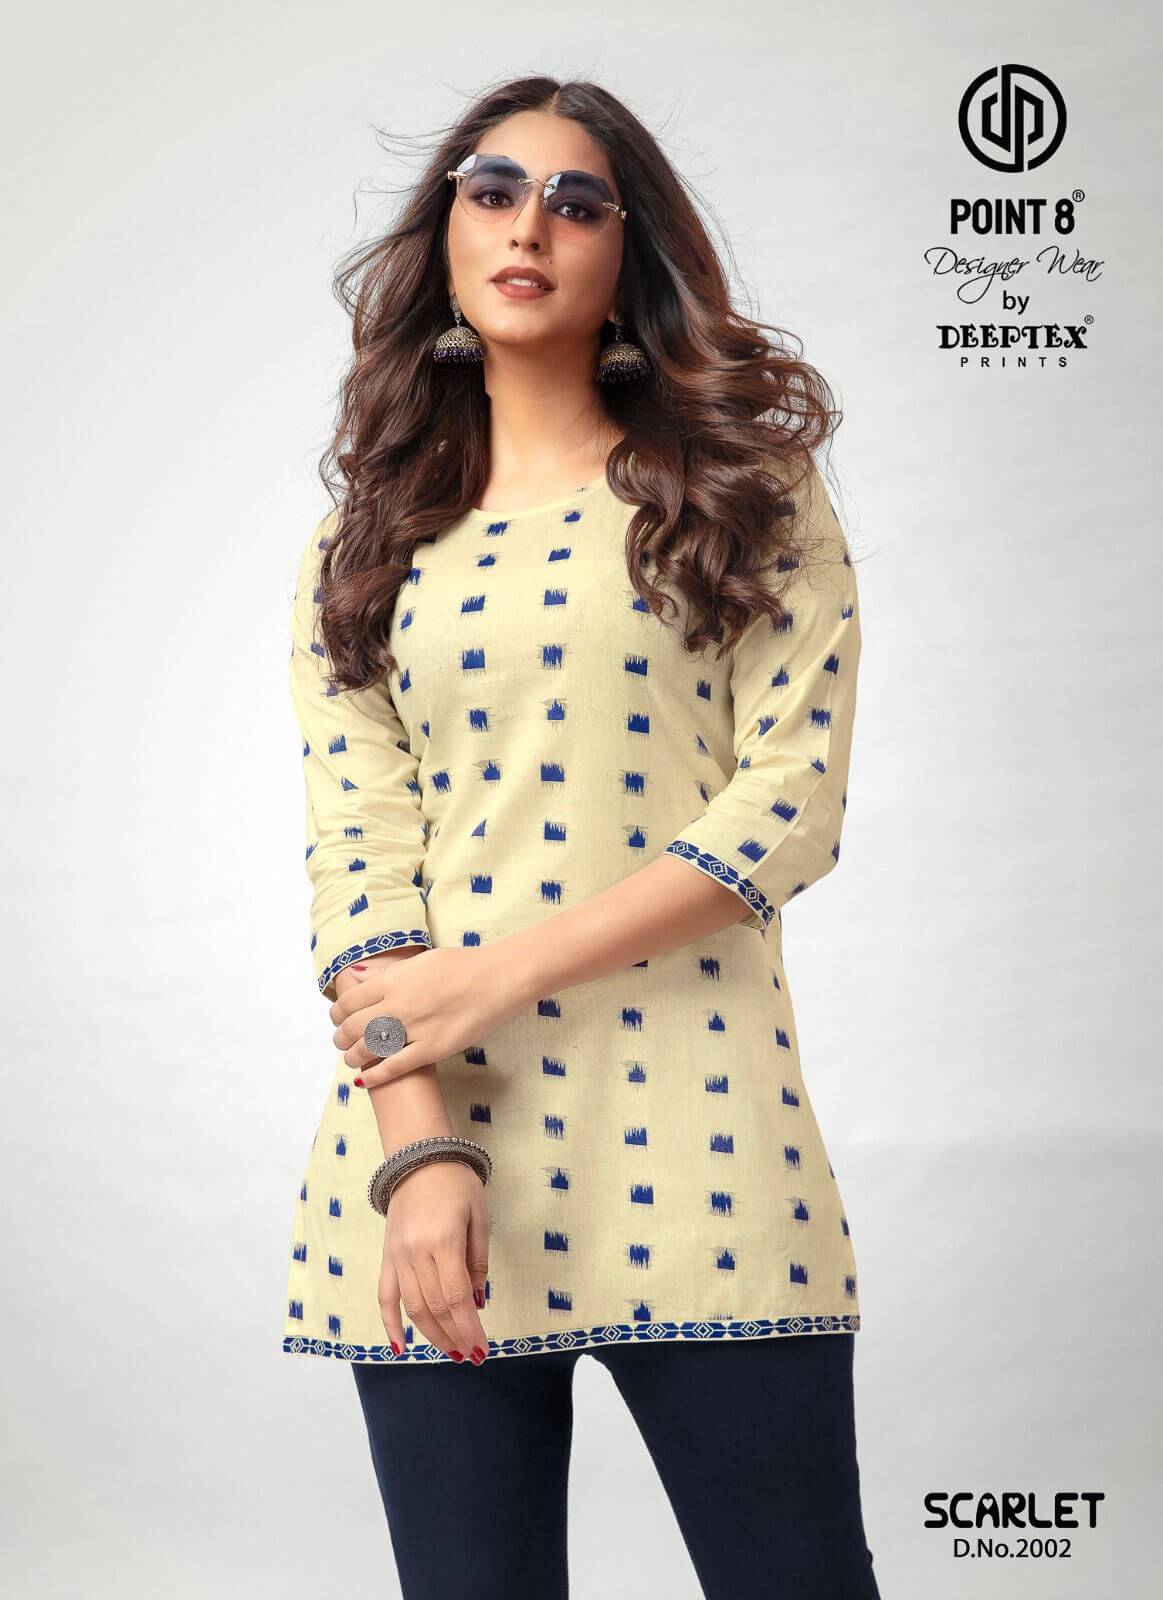 Deeptex Point 8 Scarlet vol 2 Ladies Tops Catalog collection 10